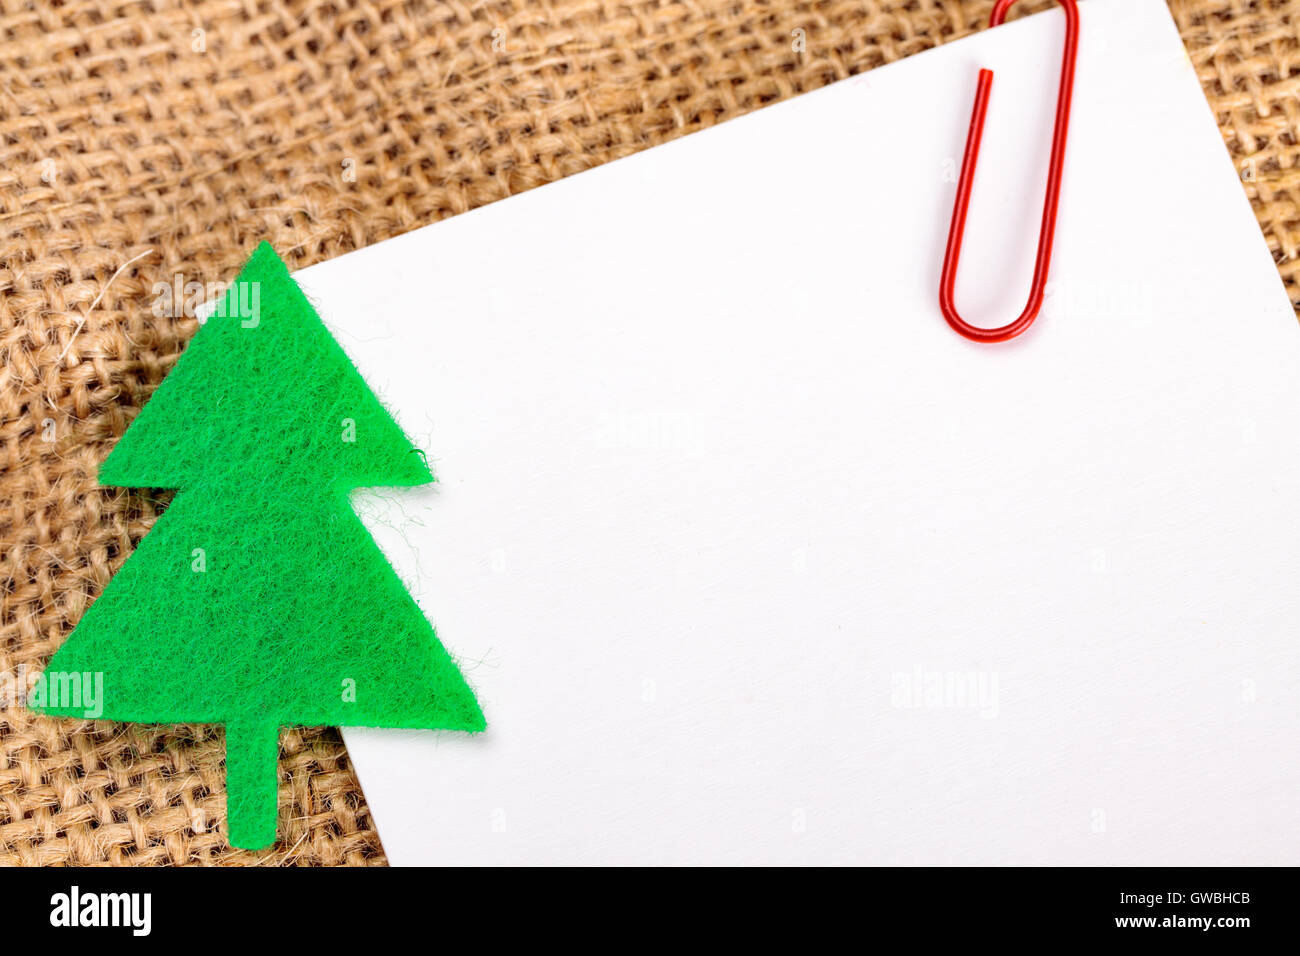 Blank card with christmas felt decorations on jute background. Stock Photo